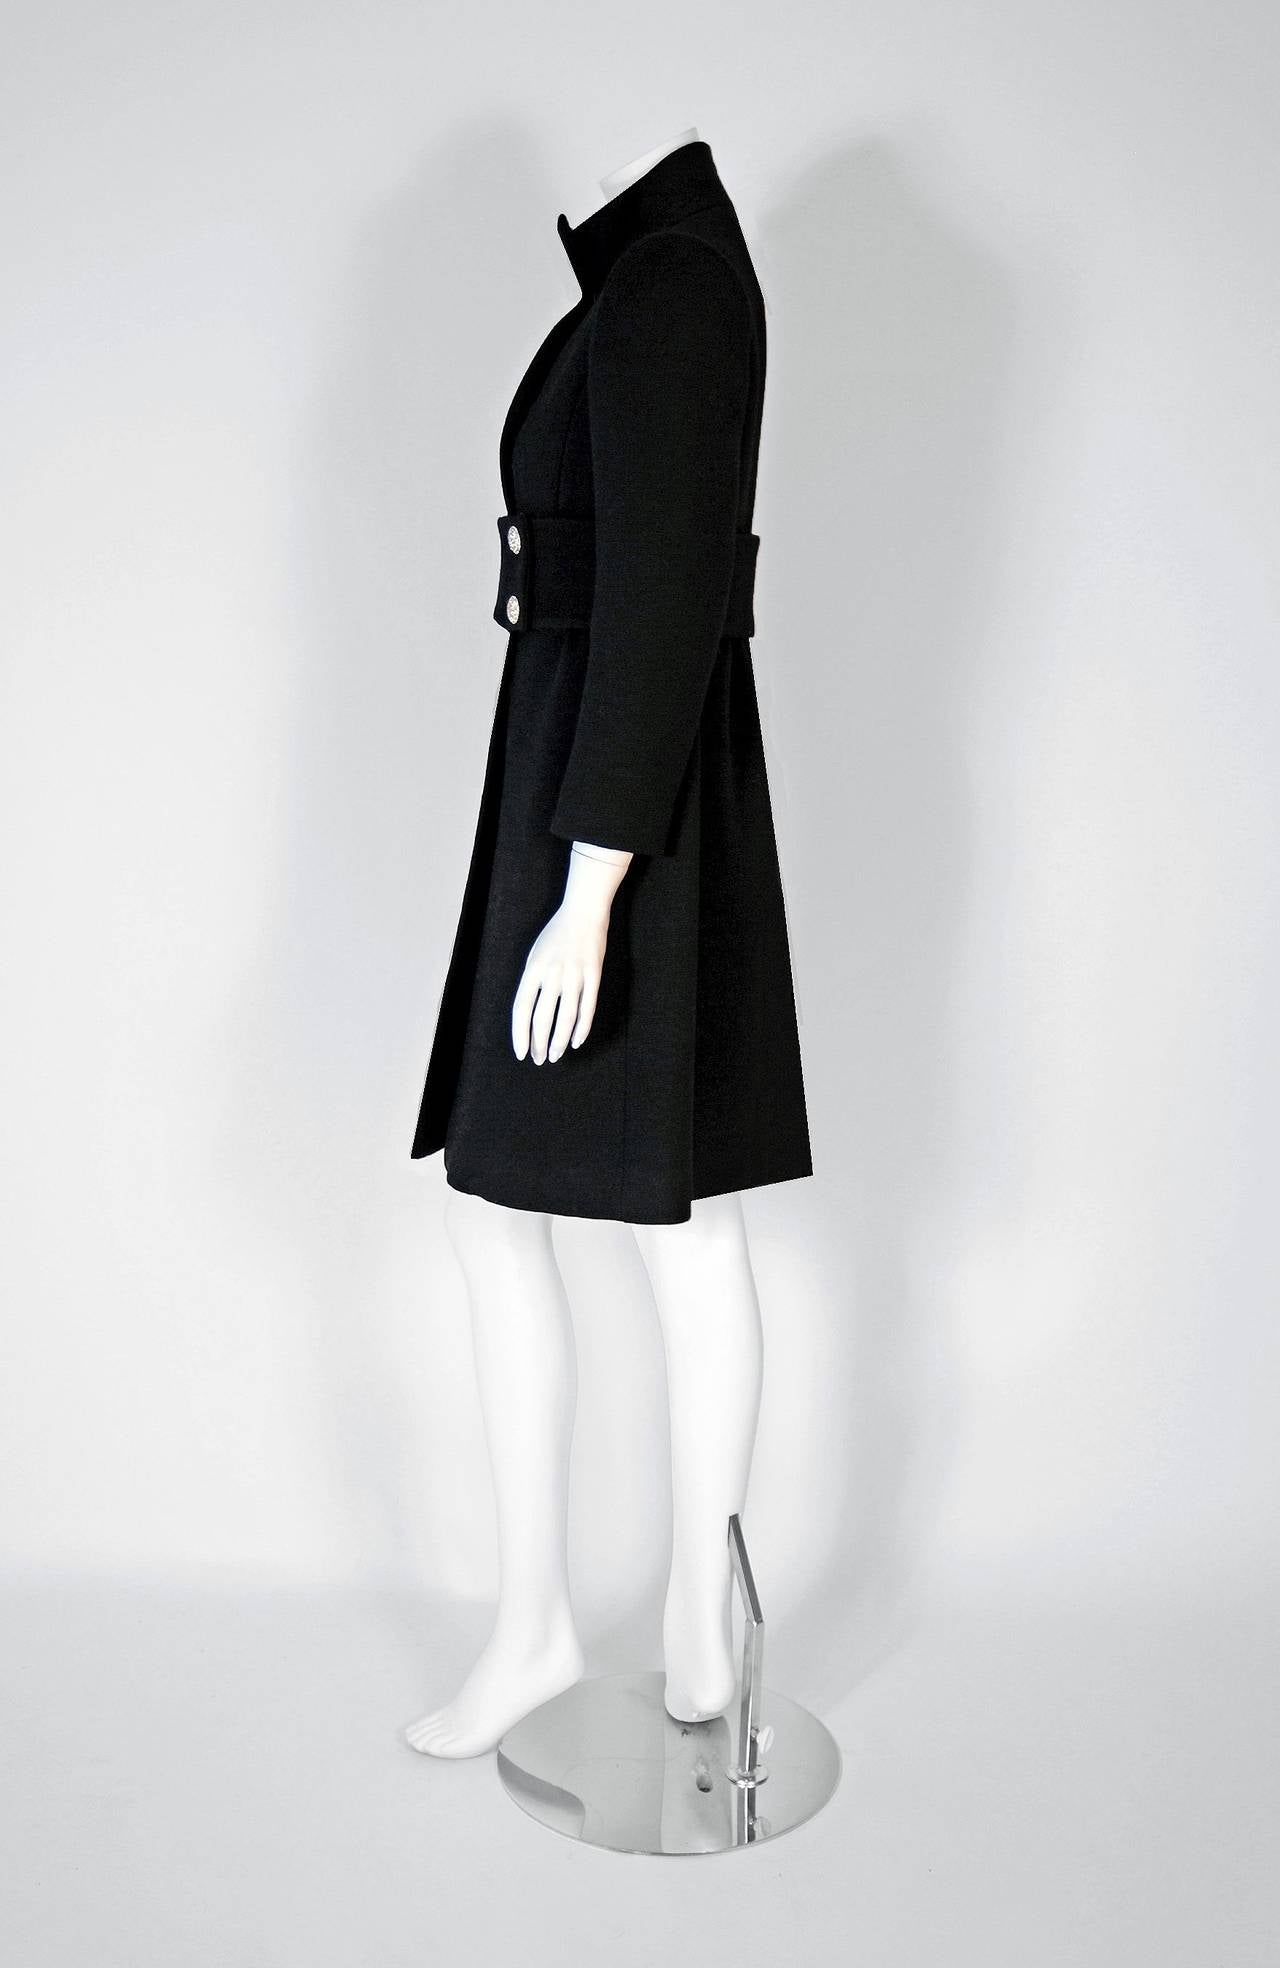 Magnificent Calvin Klein designer black wool coat from his first 1968 collection! His vision was very influential that by 1975 Vogue was calling his work 